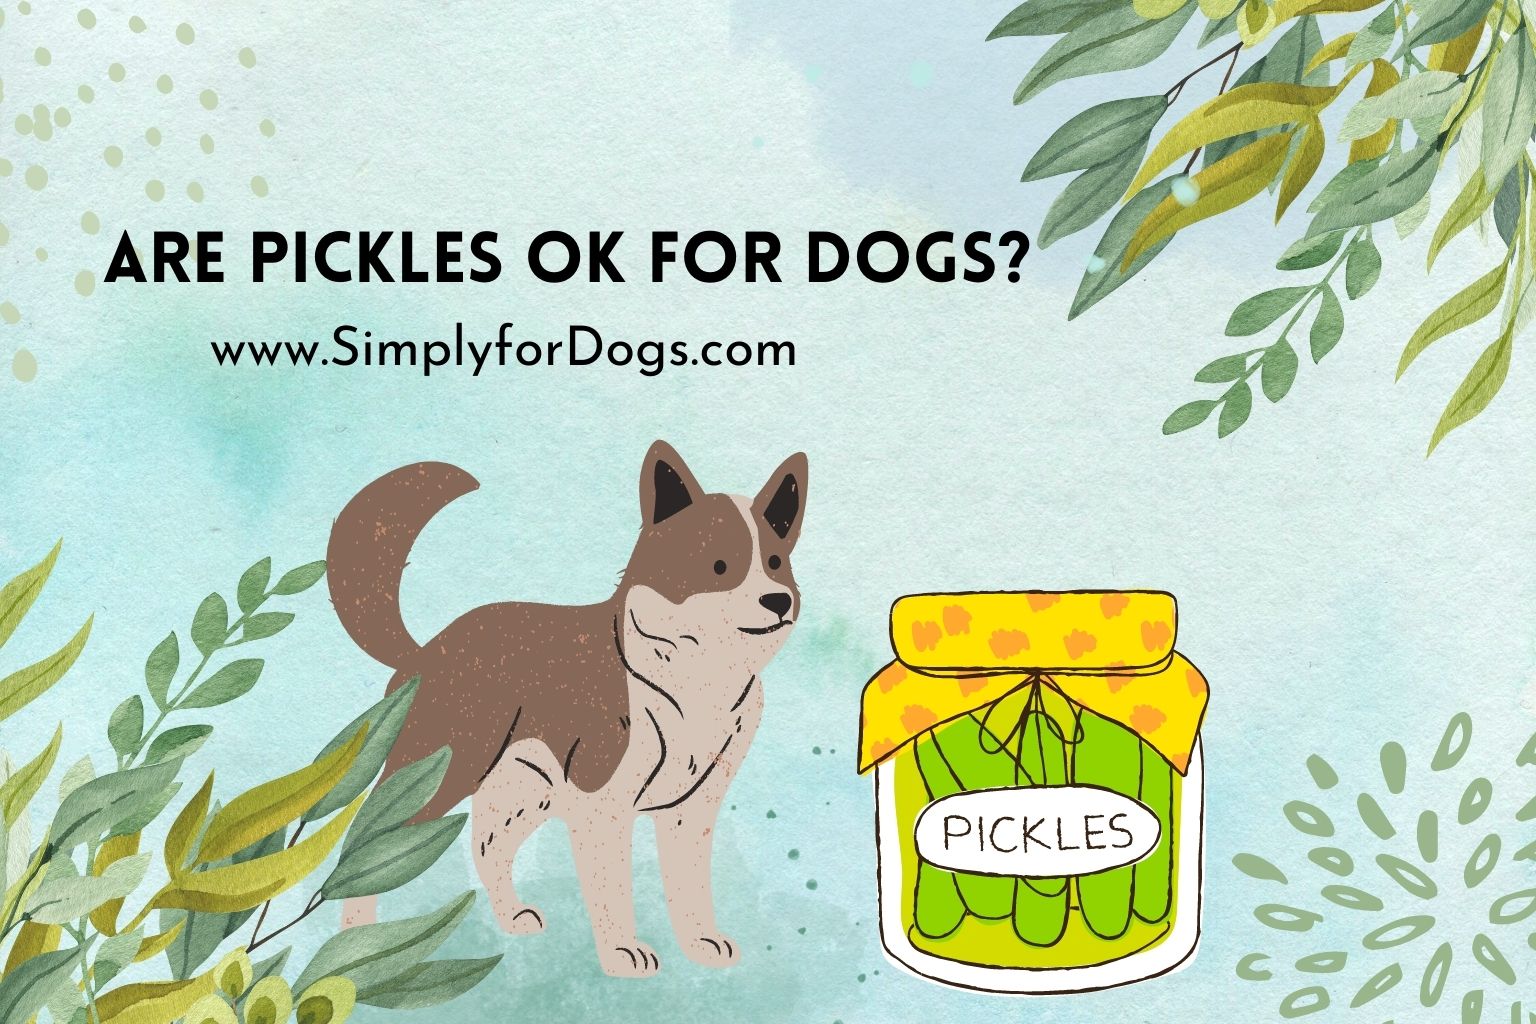 Pickles ok for Dogs